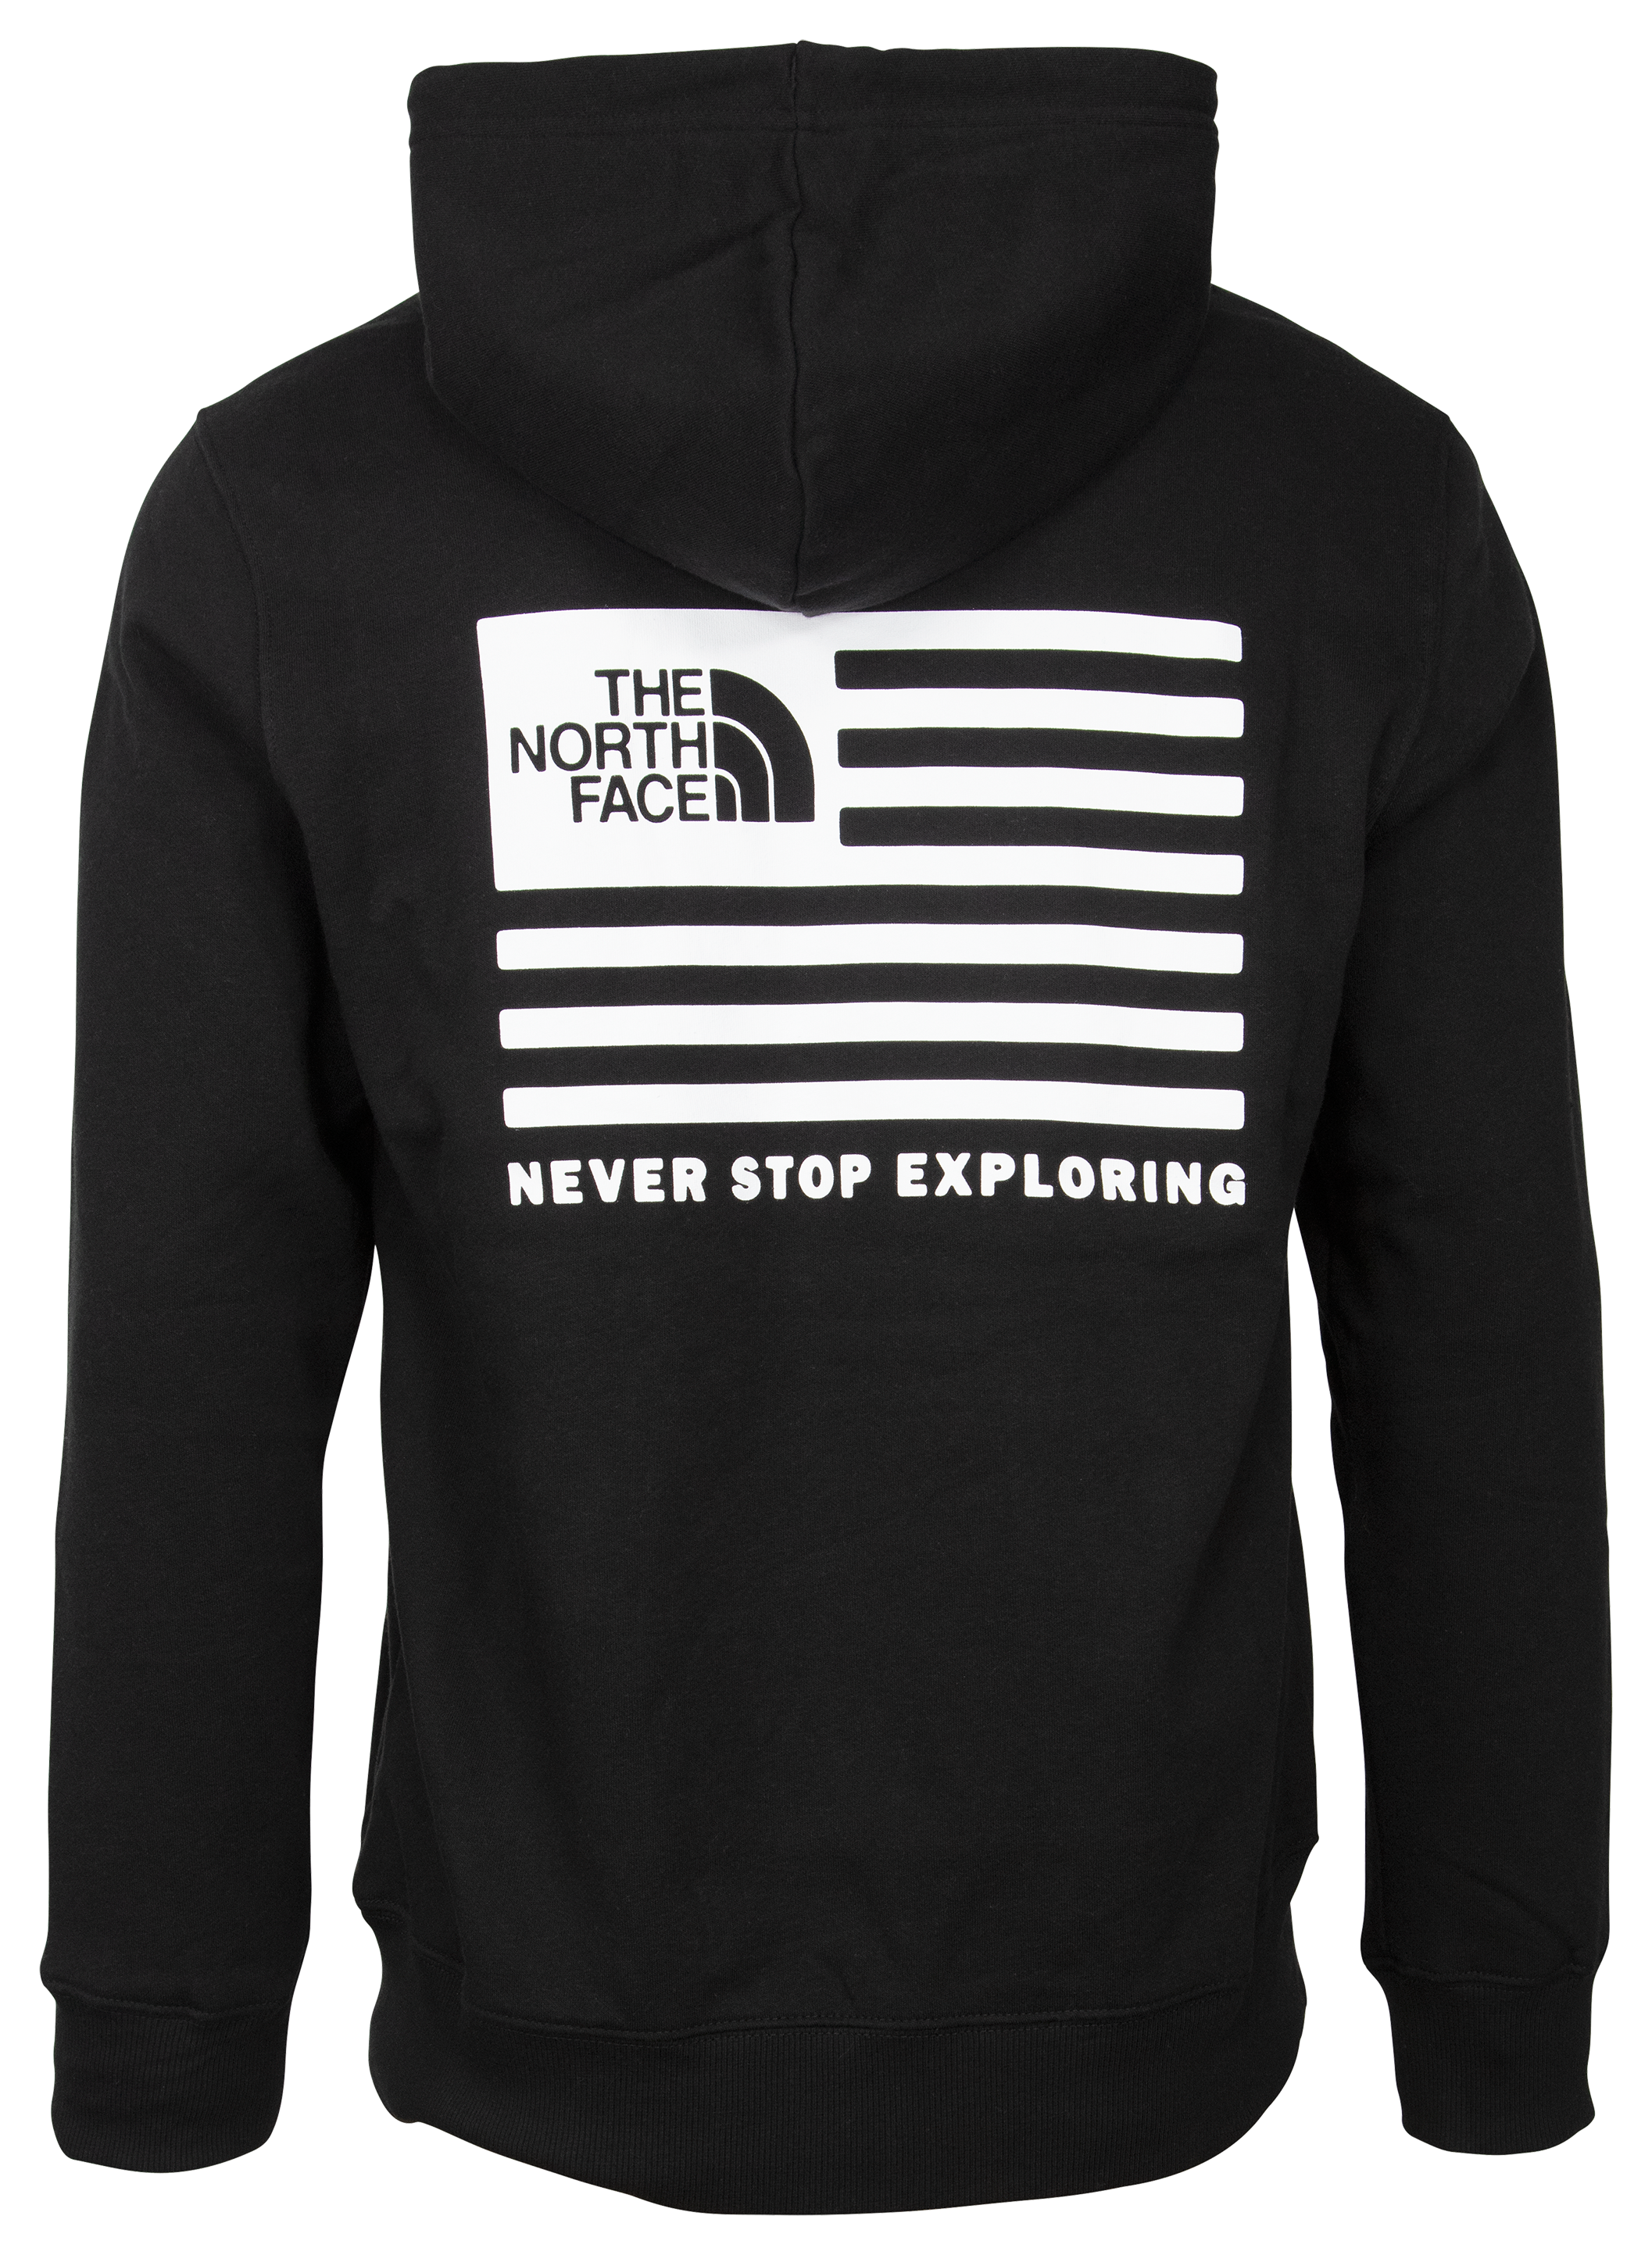 The North Face Box Flag Pullover Long-Sleeve Hoodie for Men